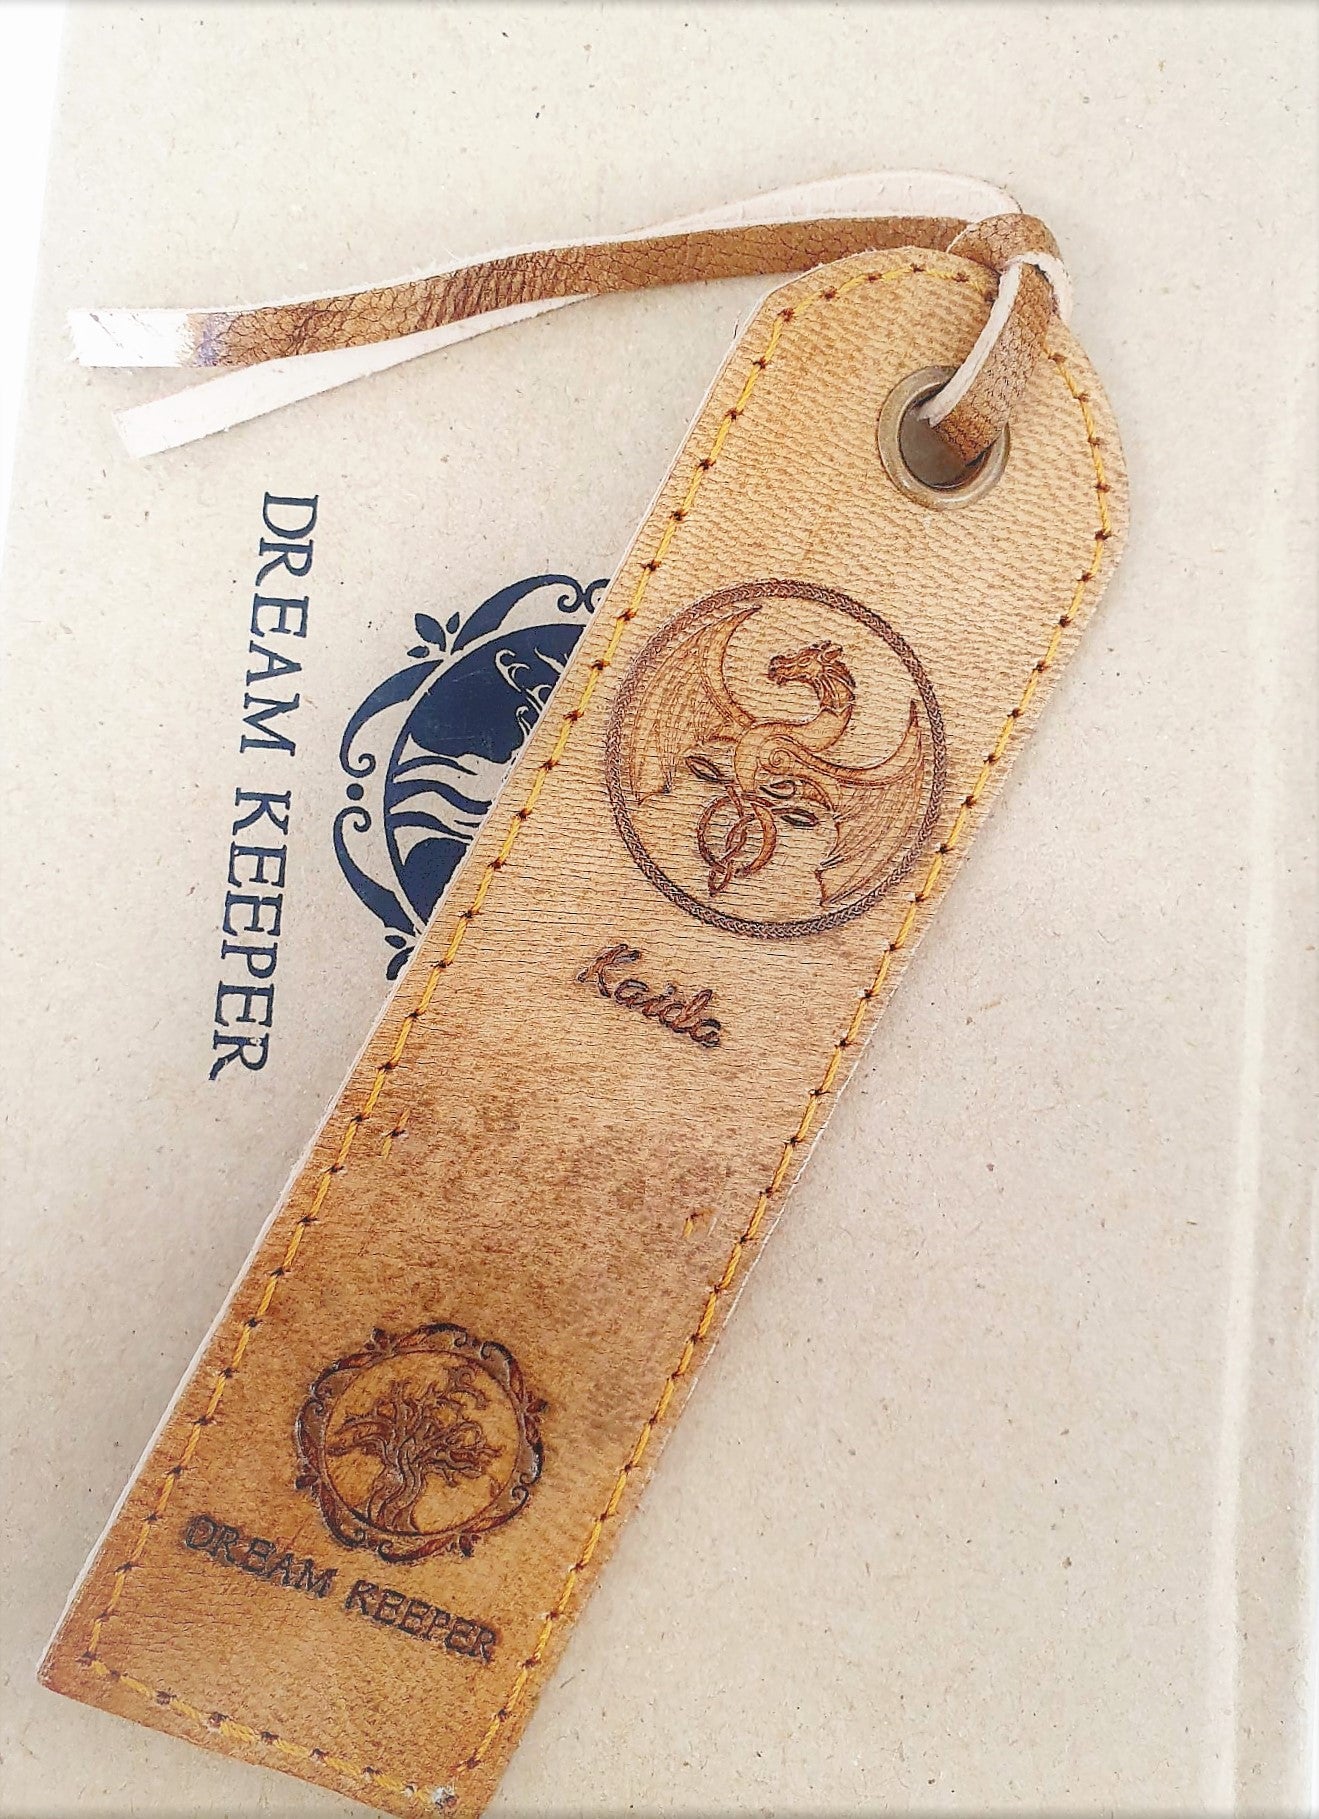 Pair of Handmade Leather Bookmarks with DreamKeeper Dragon Design - Kaida